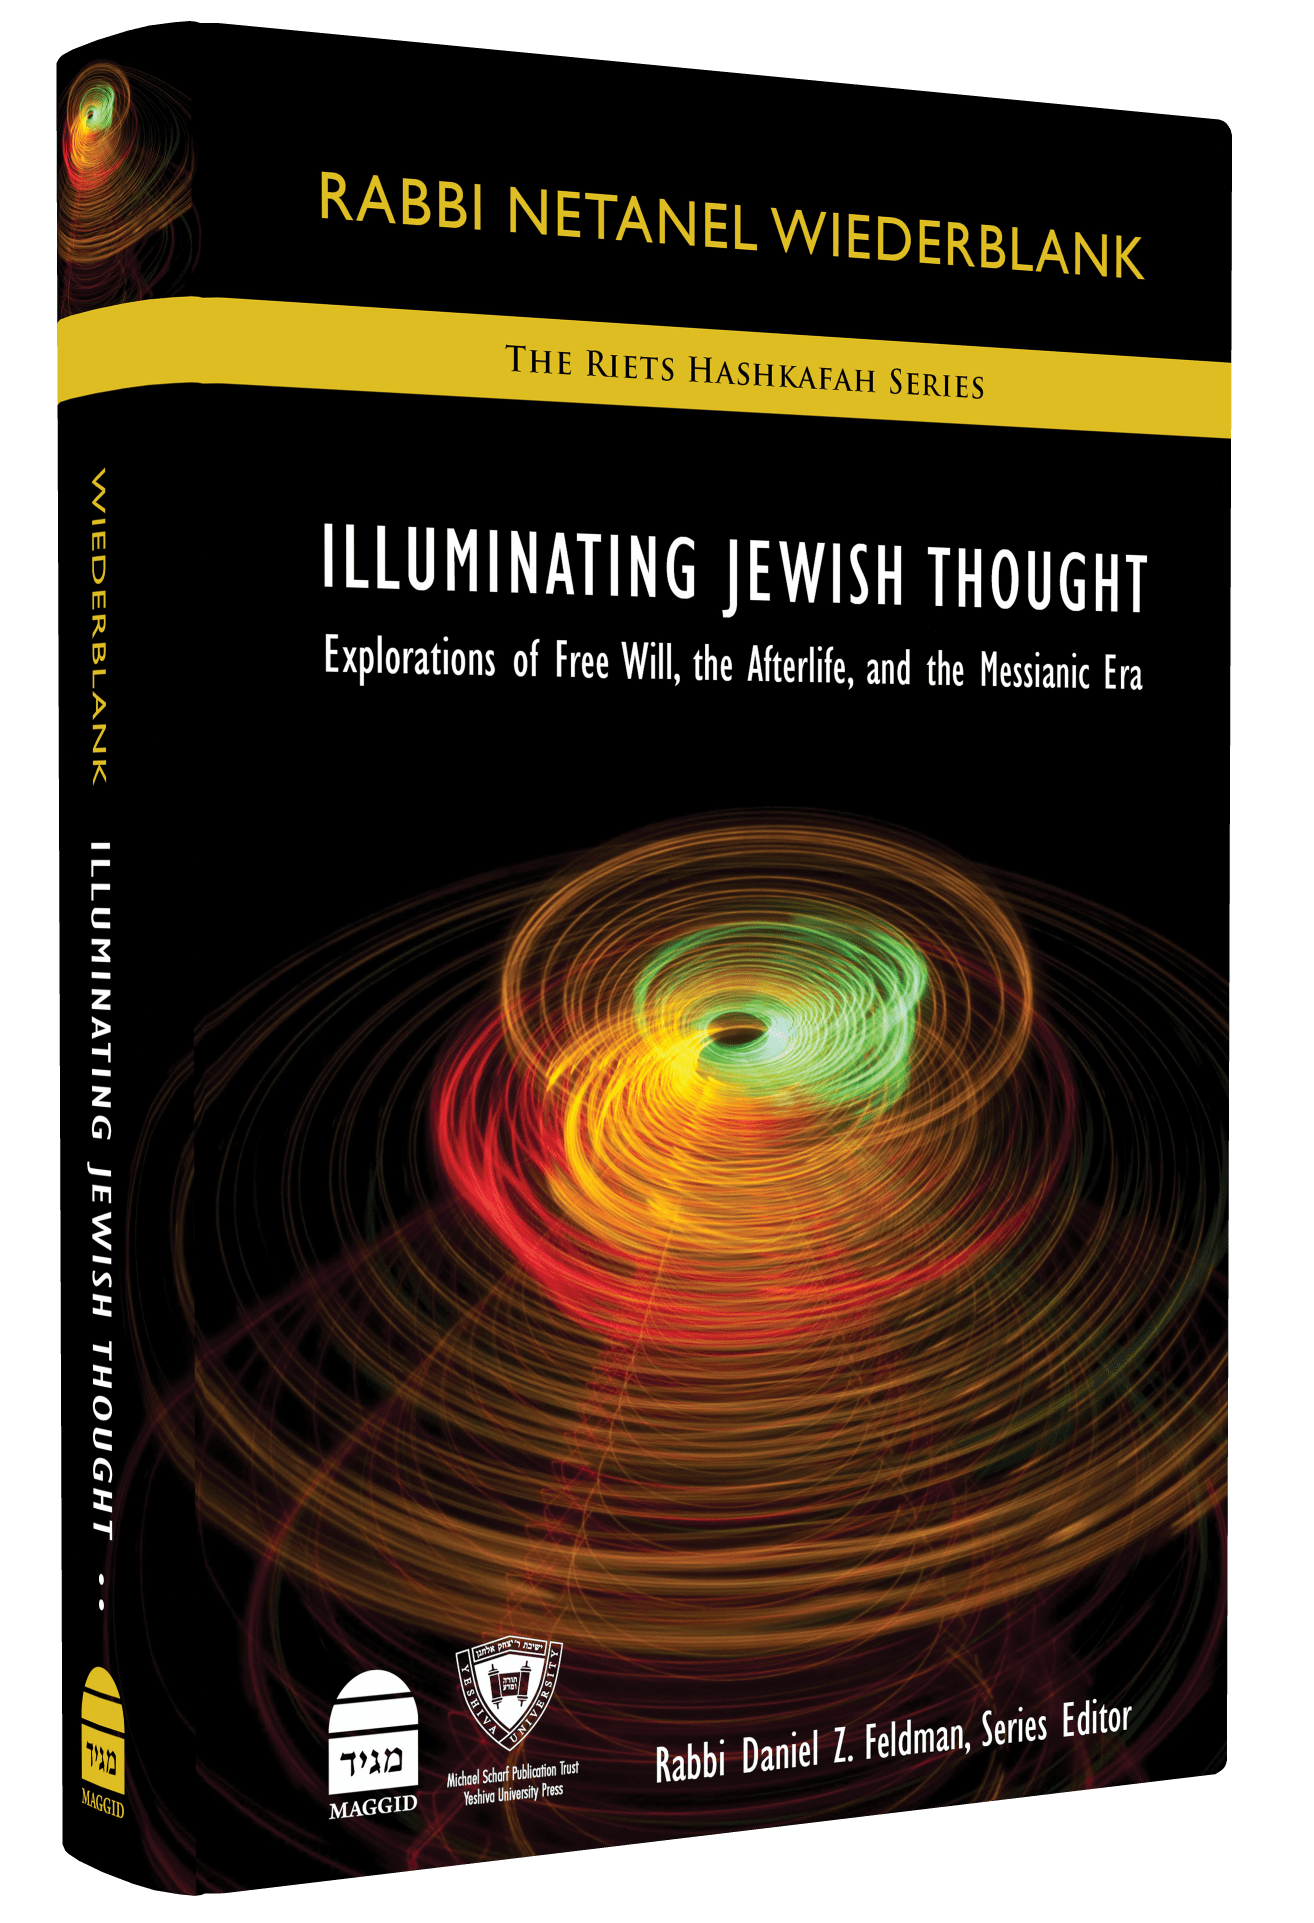 Guest Review of “Illuminating Jewish Thought” by R. Netanel Wiederblank